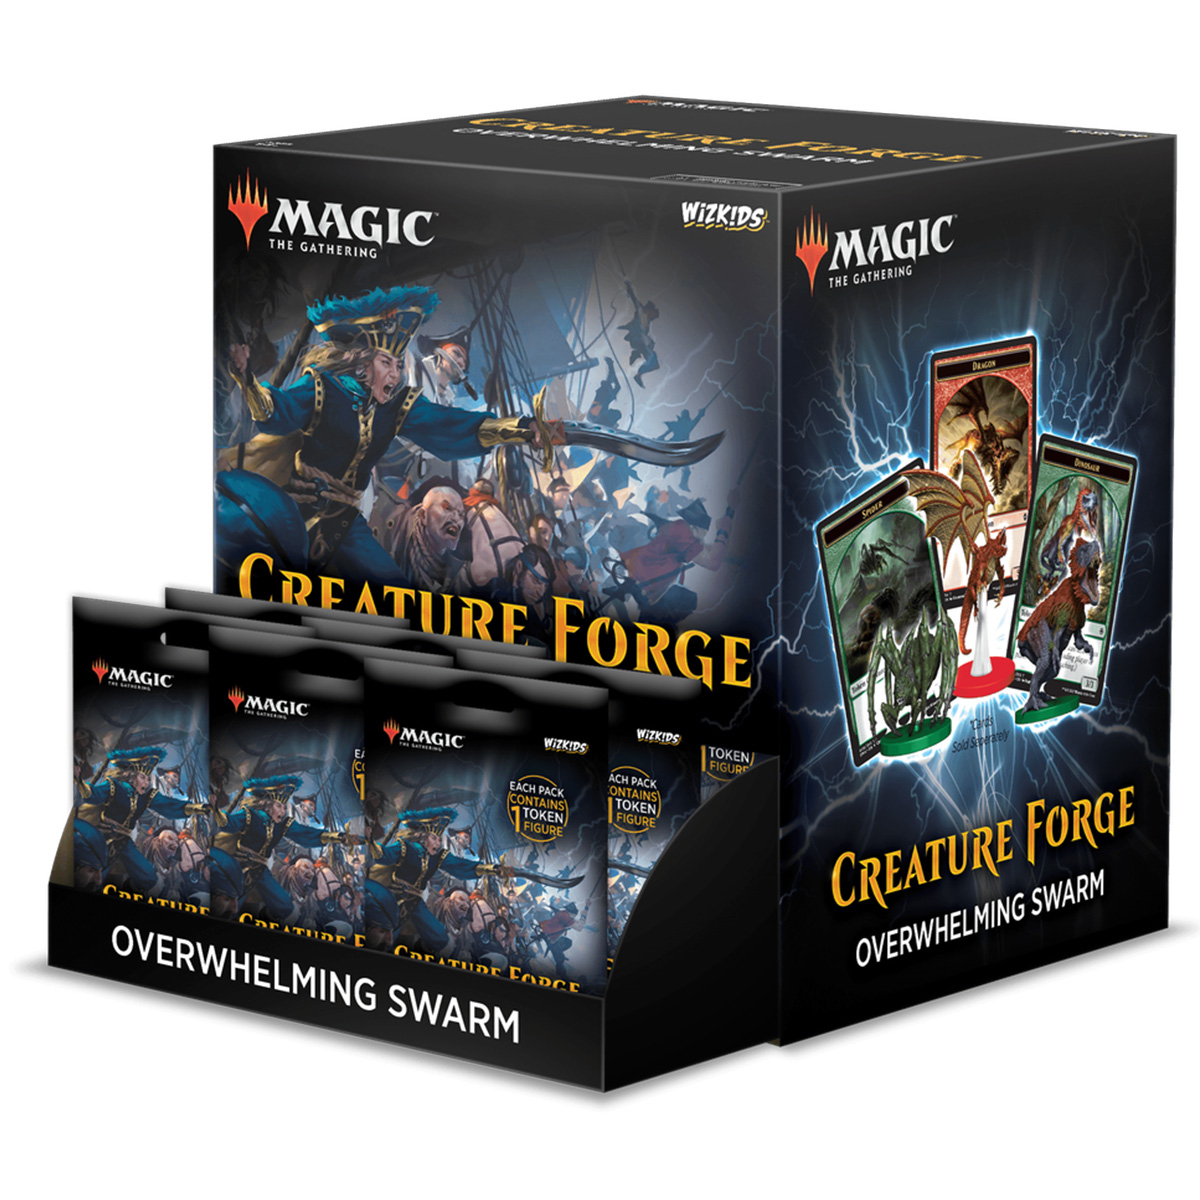 WizKids Magic The Gathering Creature Forge Overwhelming Swarm Blind Figure